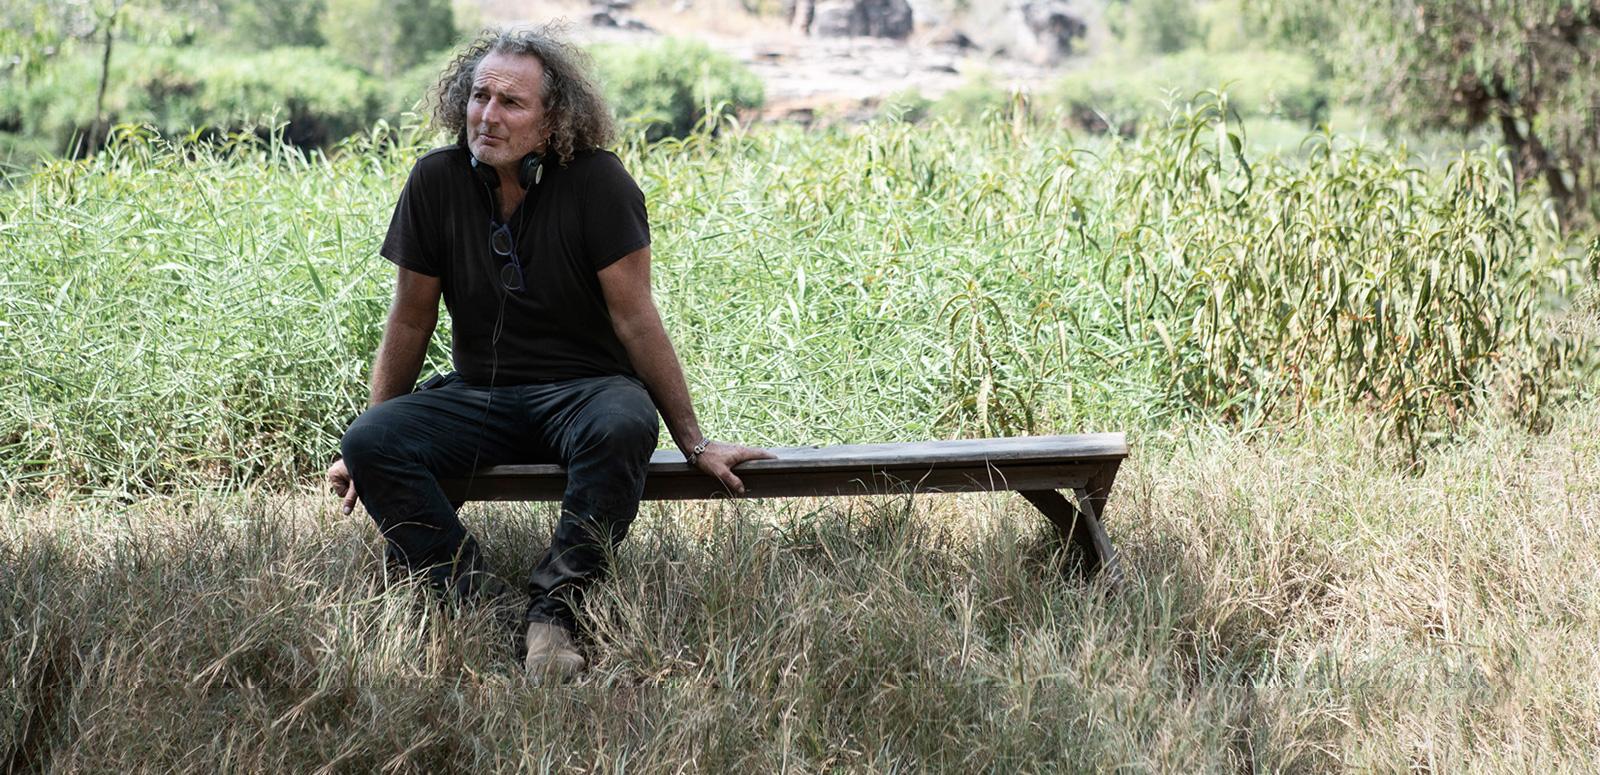 Director Stephen Maxwell Johnson sitting on a wooden bench in a grassy area on the set of his film High Ground. 